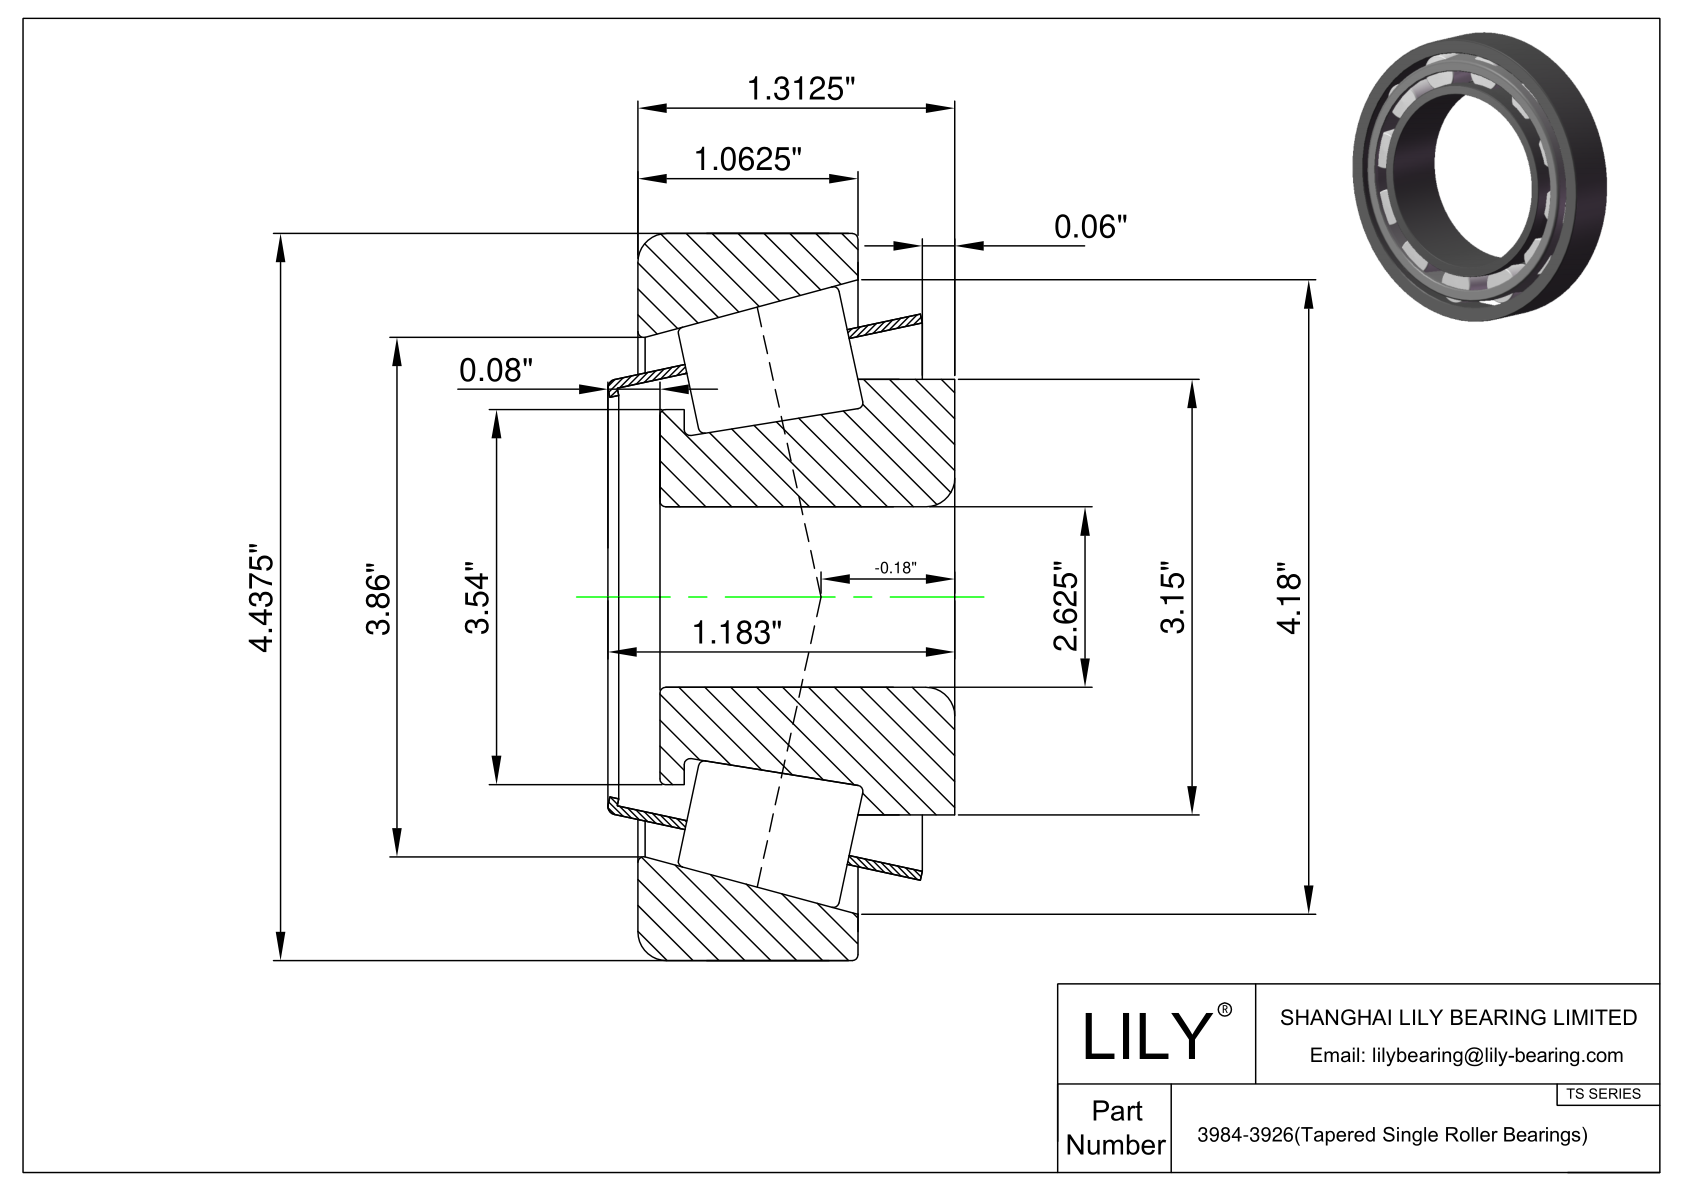 3984-3926 TS (Tapered Single Roller Bearings) (Imperial) cad drawing